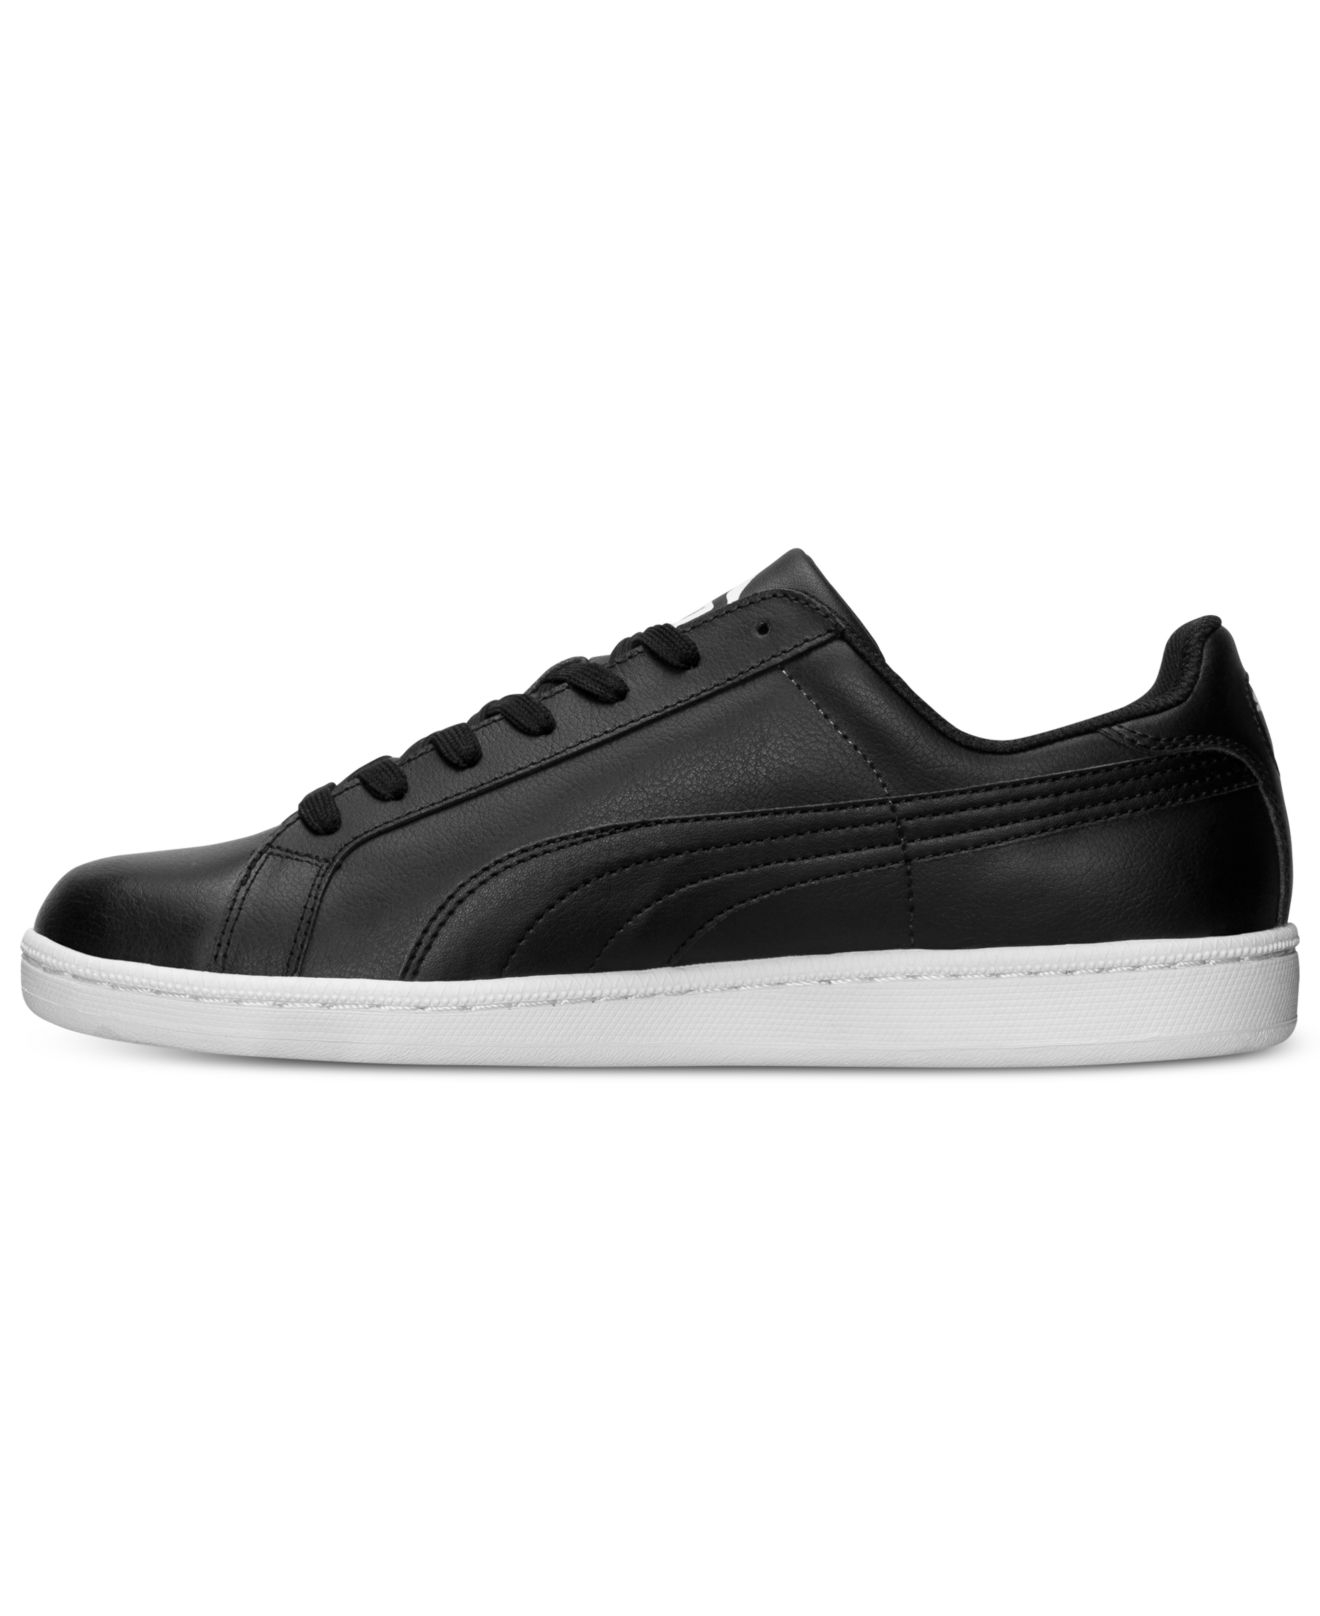 puma black shoes with white sole off 78 